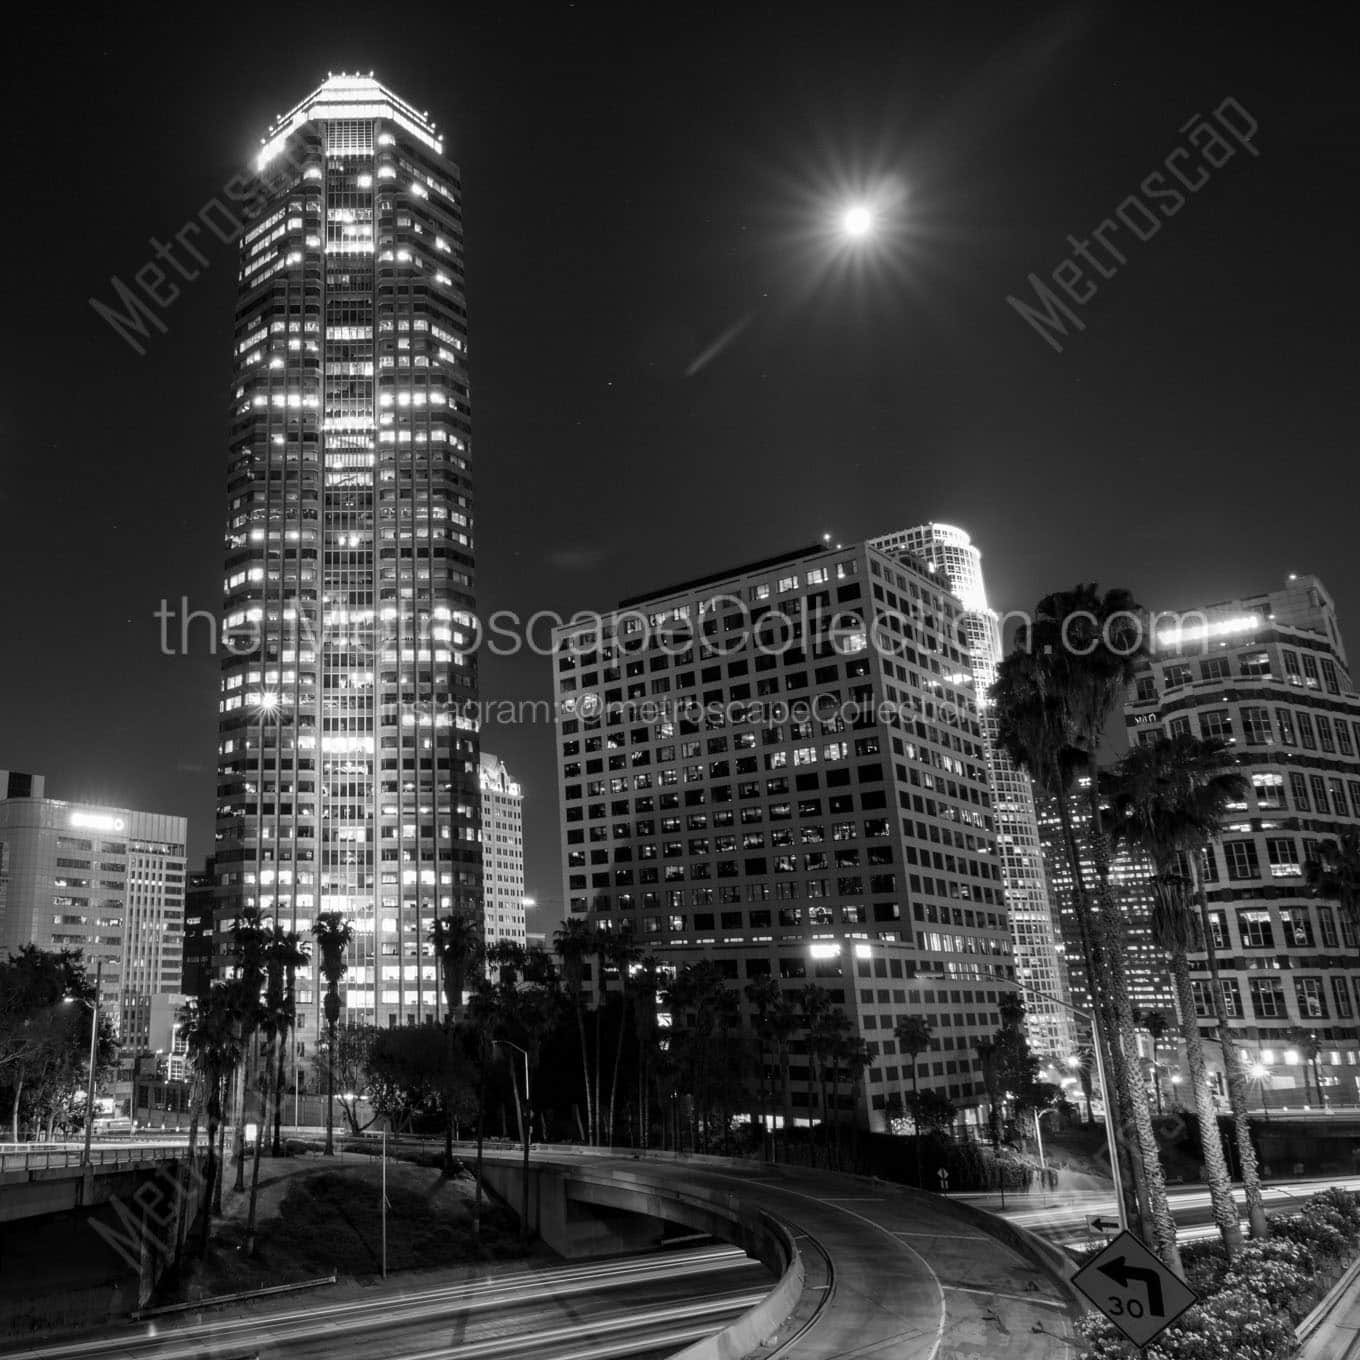 pwc building from fifth street exit ramp Black & White Wall Art